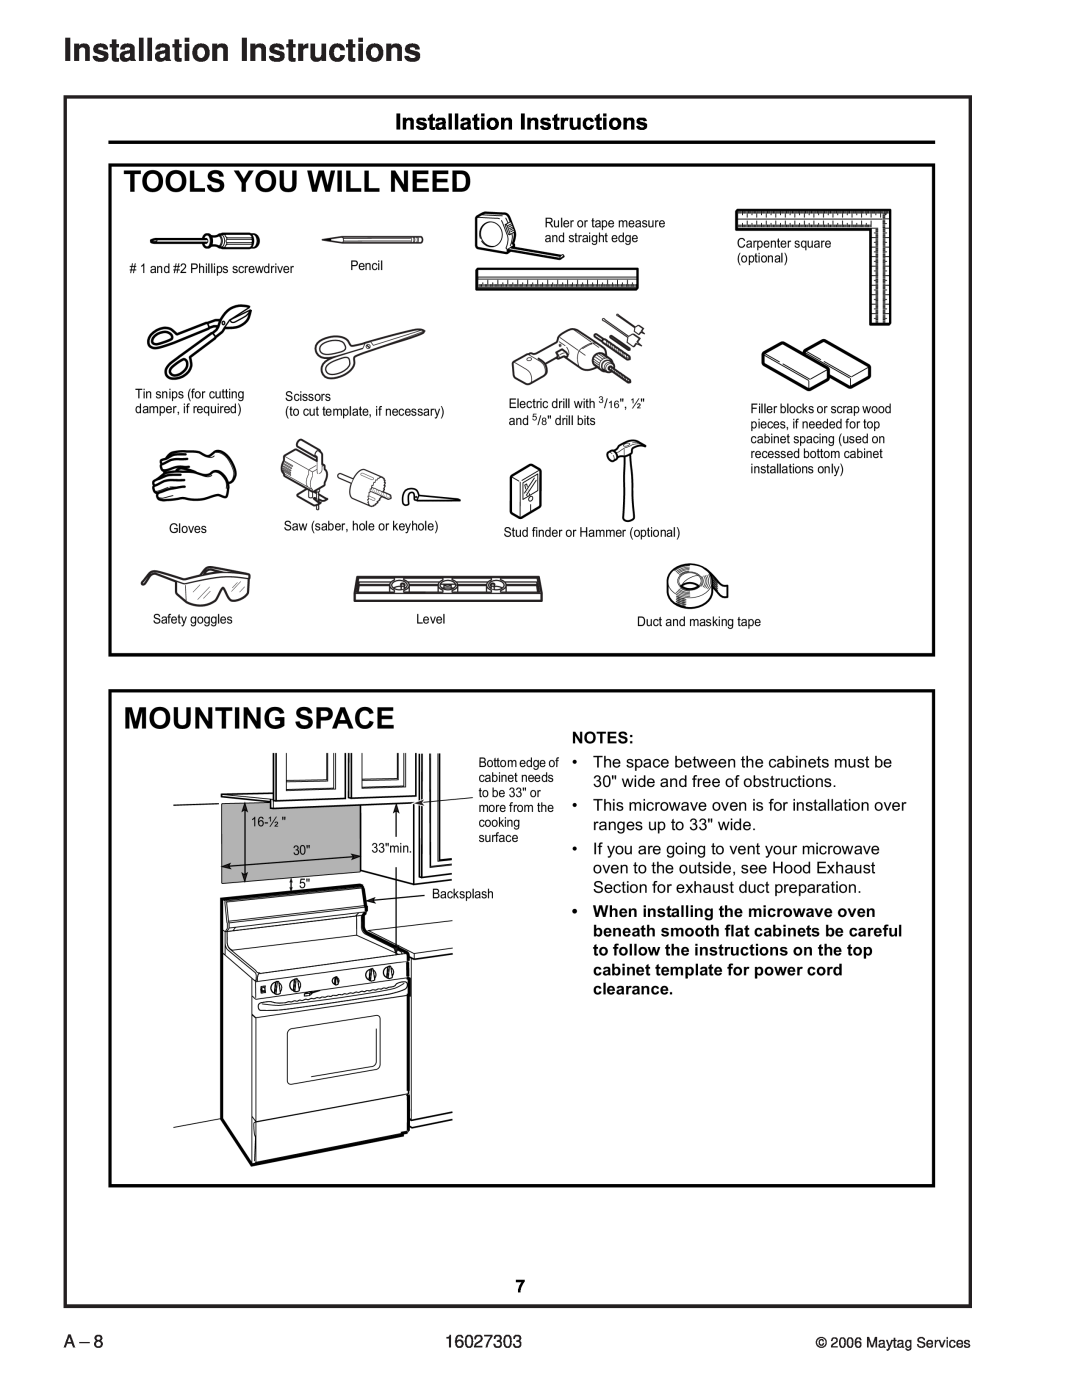 Maytag UMV1152CA manual Tools You Will Need, Mounting Space, Installation Instructions, Notes 